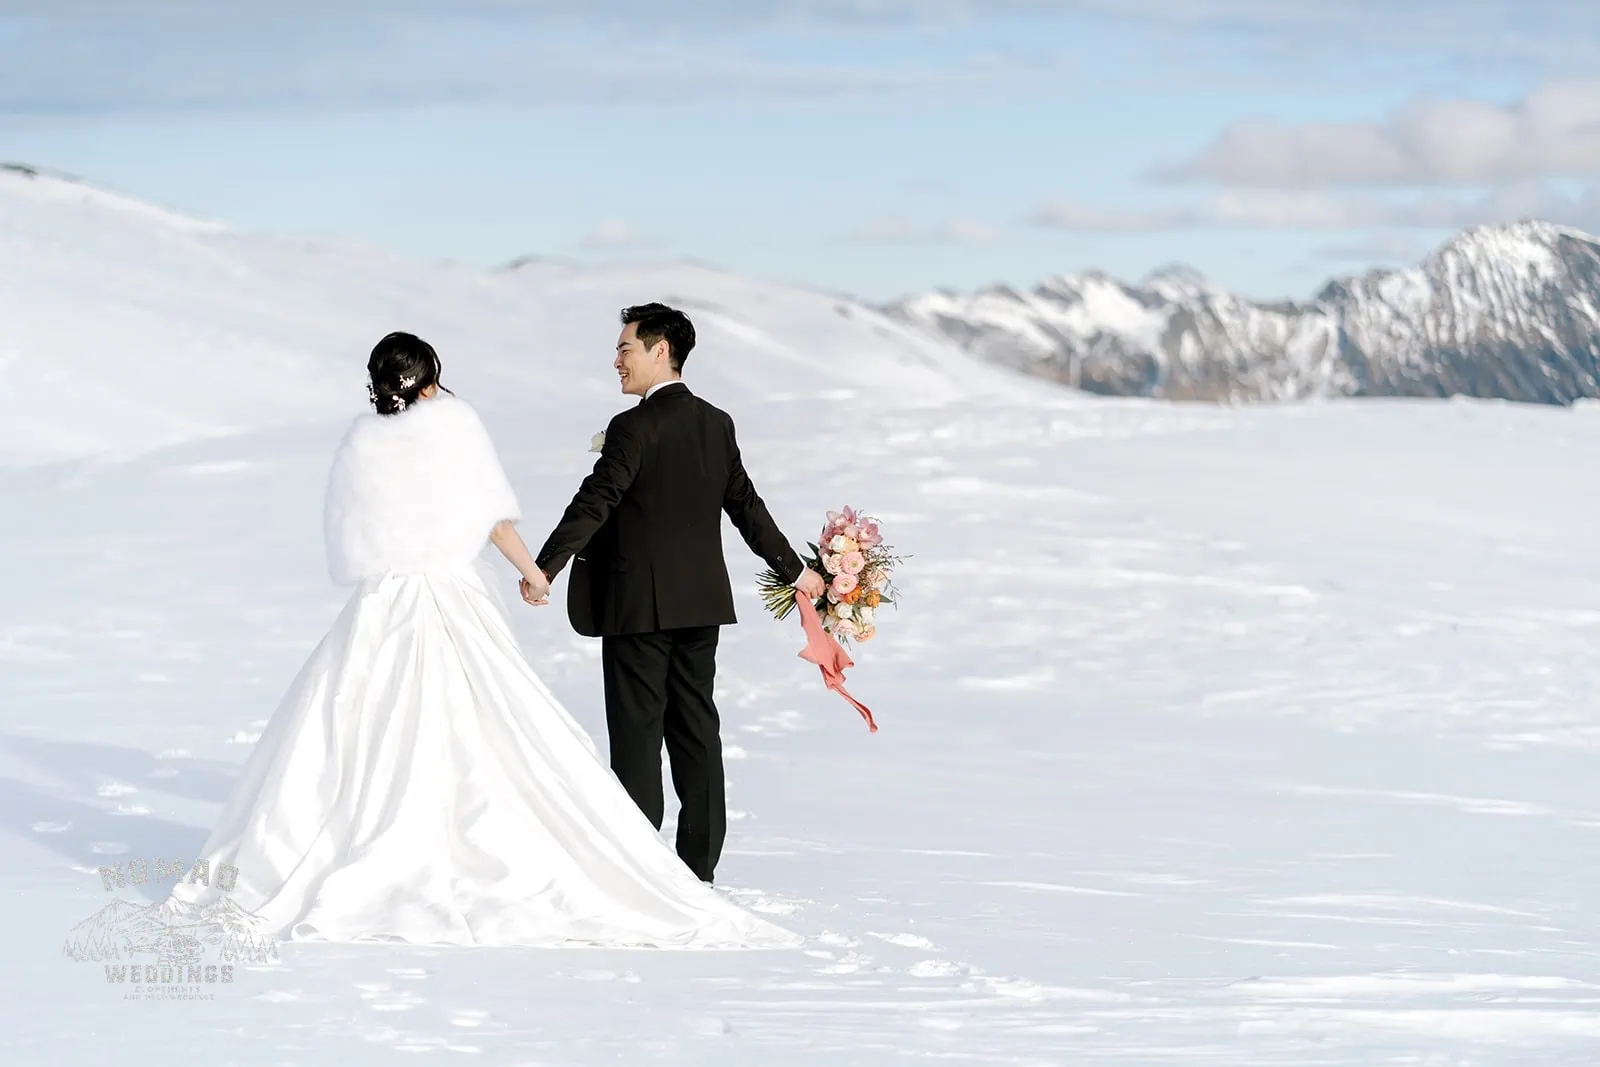 Queenstown New Zealand Elopement Wedding Photographer - Bo and Junyi, a bride and groom, hold hands on a snow-covered mountain during their Heli Pre Wedding Shoot.